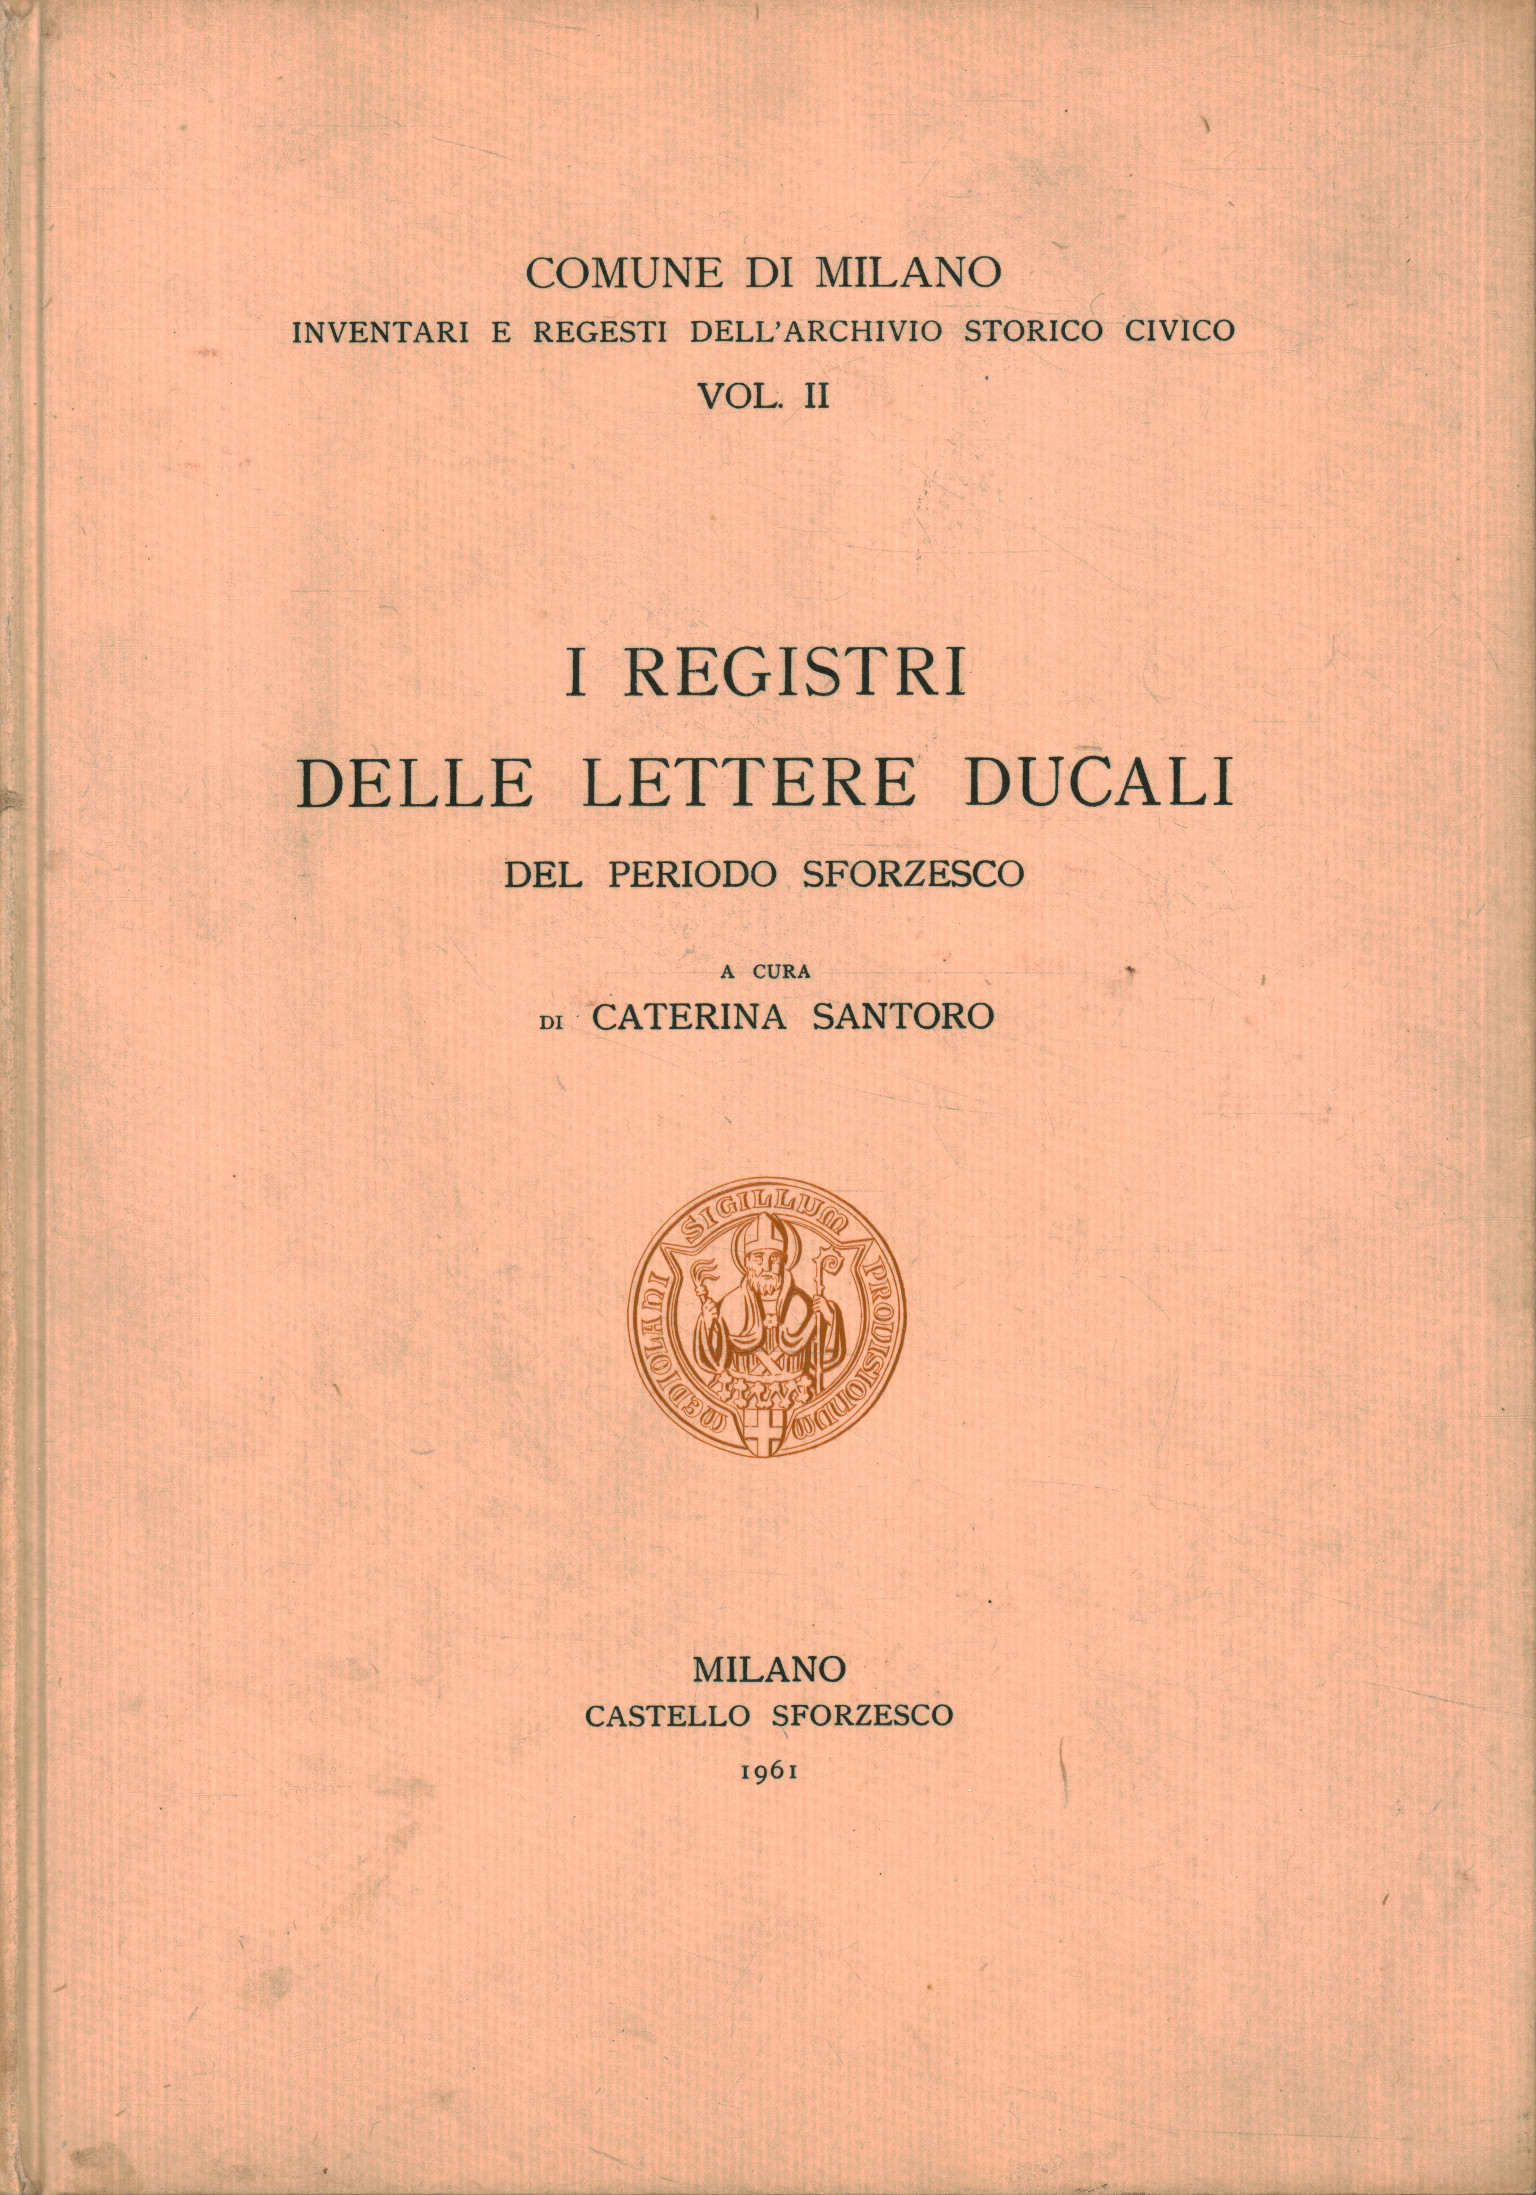 The registers of the ducal letters of the pe